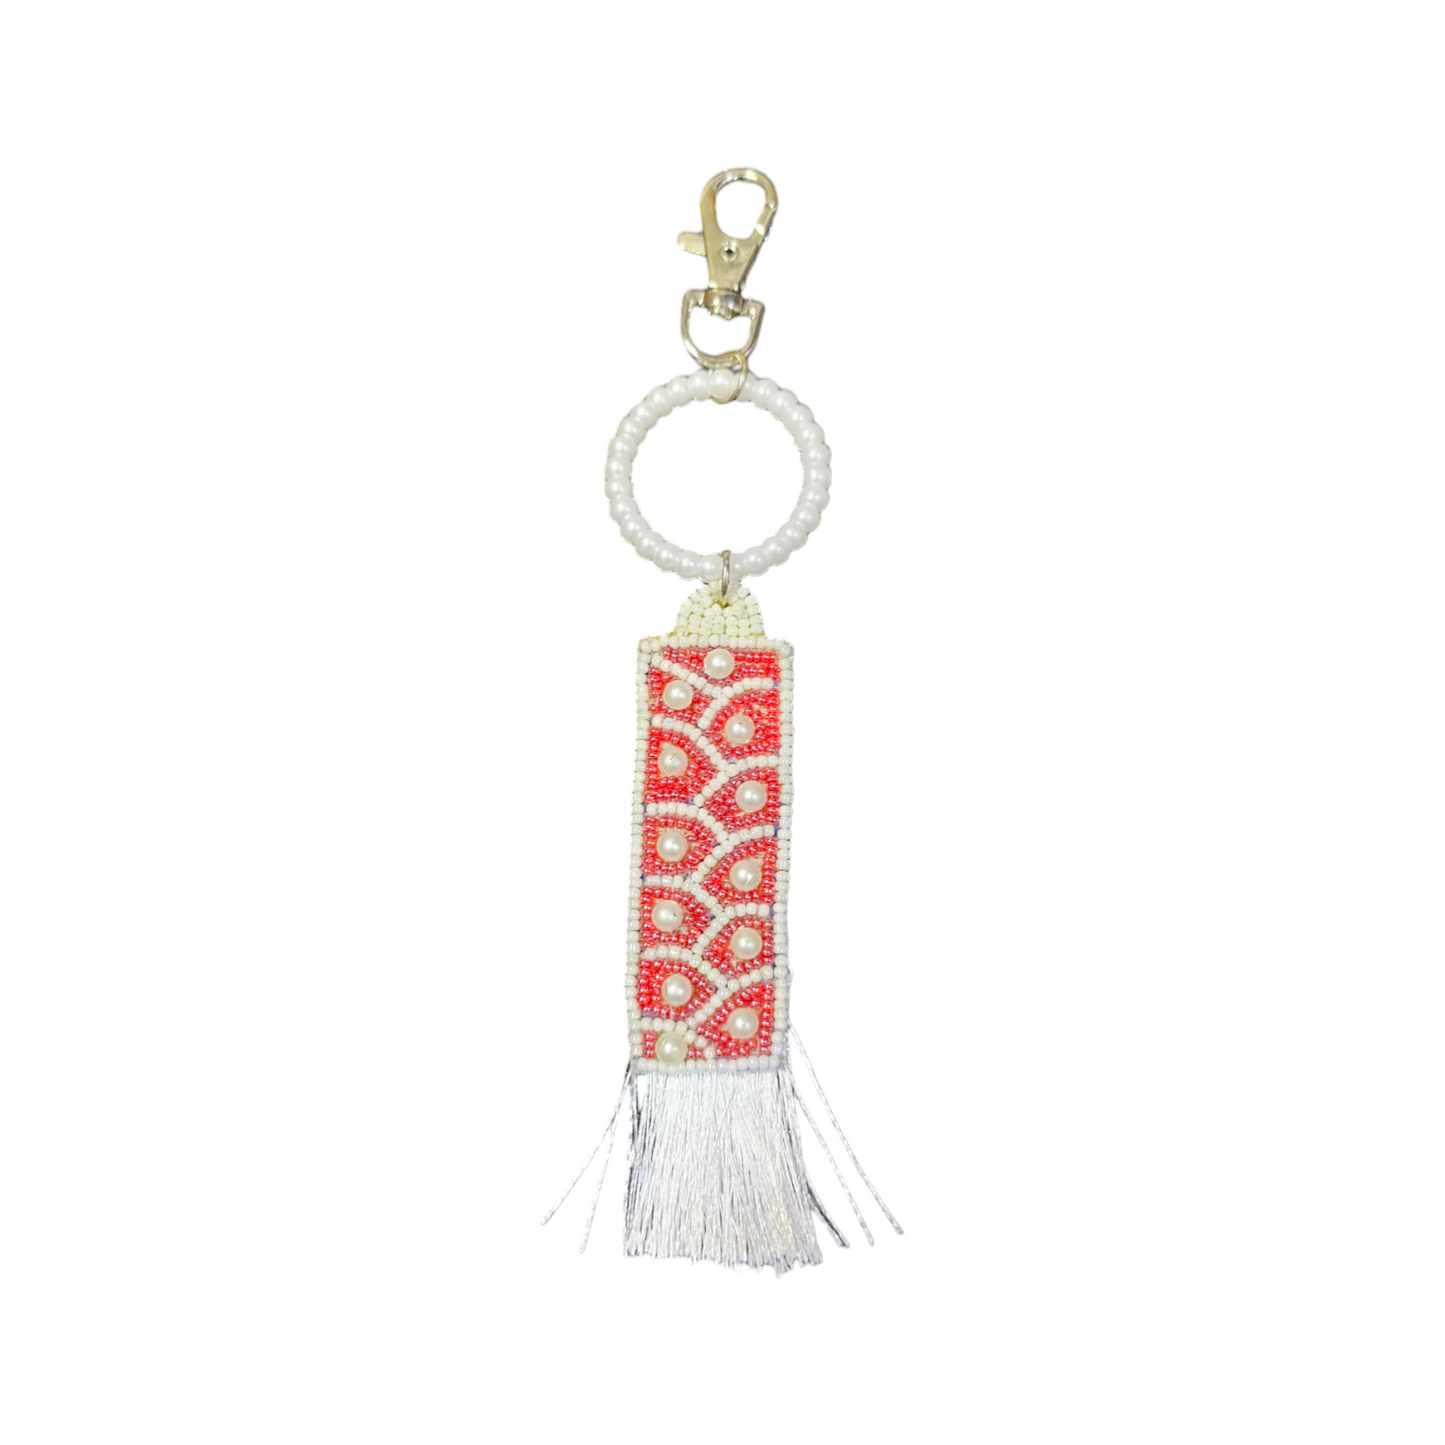 A Vdesi bag charm with pearls that will elevate your bag's look. 